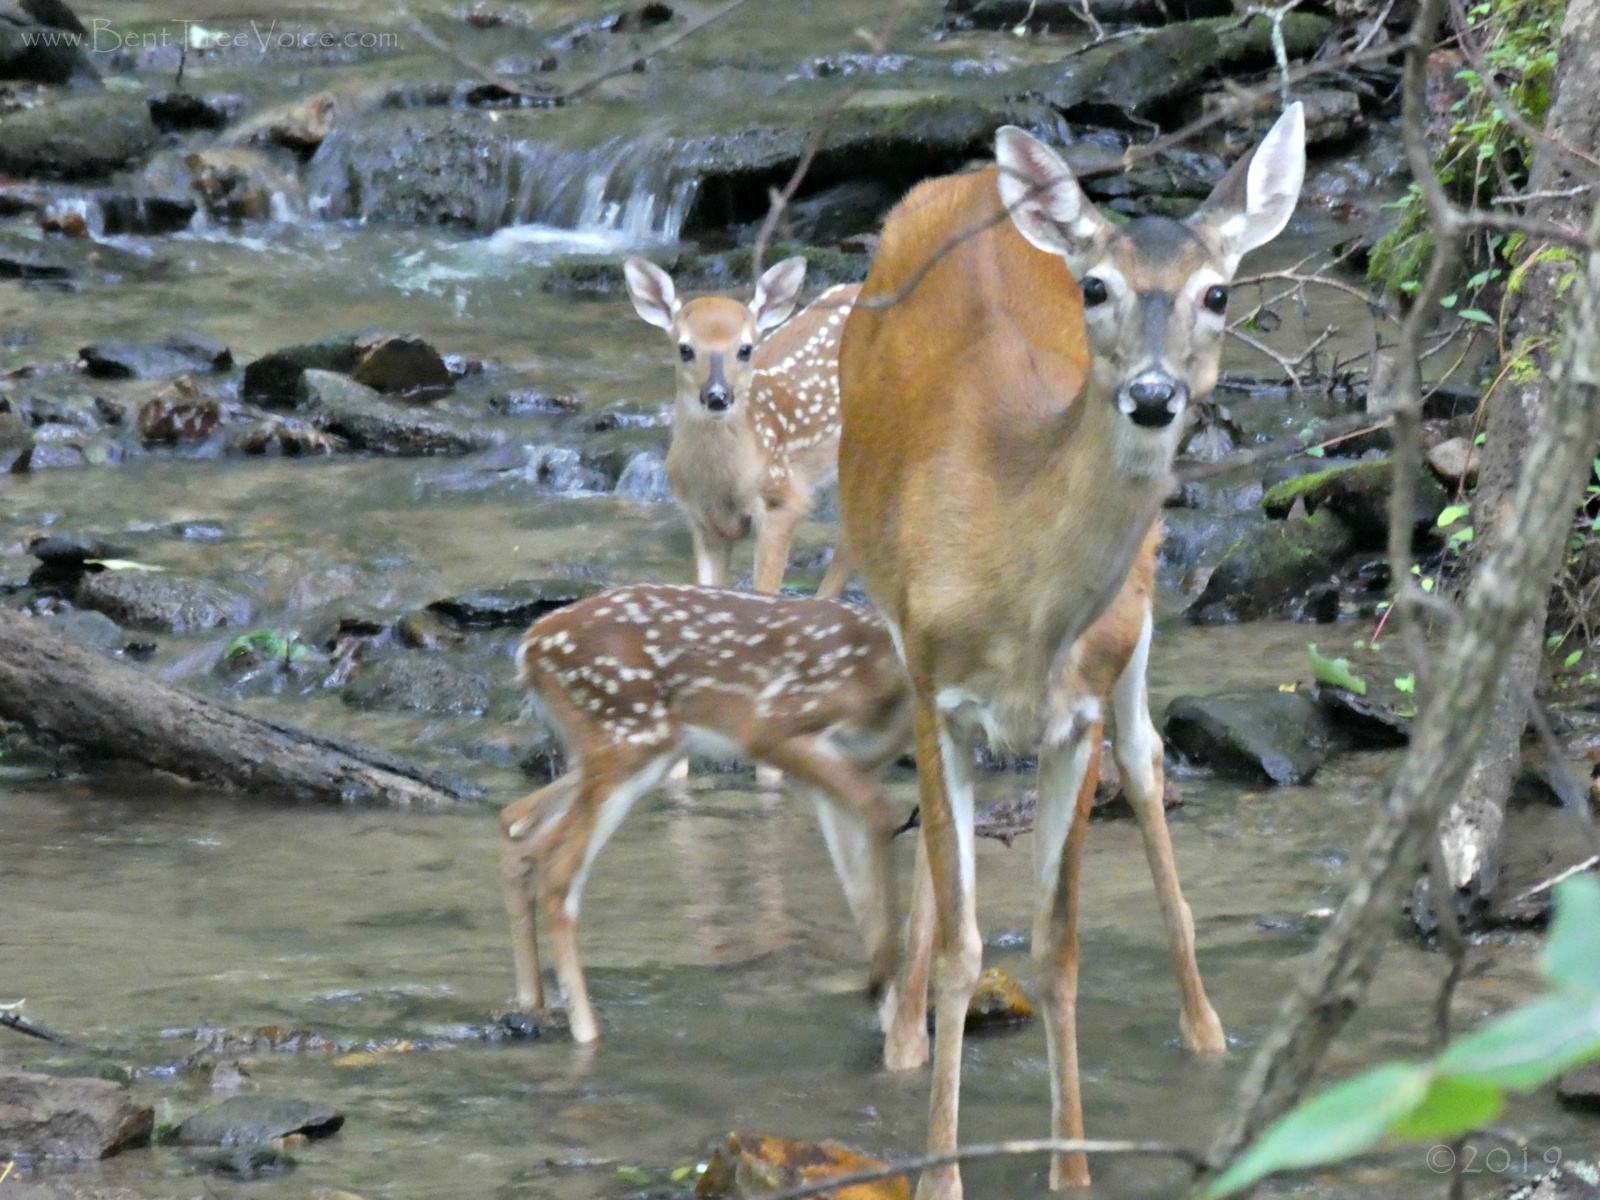 June 26, 2019 - Doe and twin fawns in Bent Tree creek